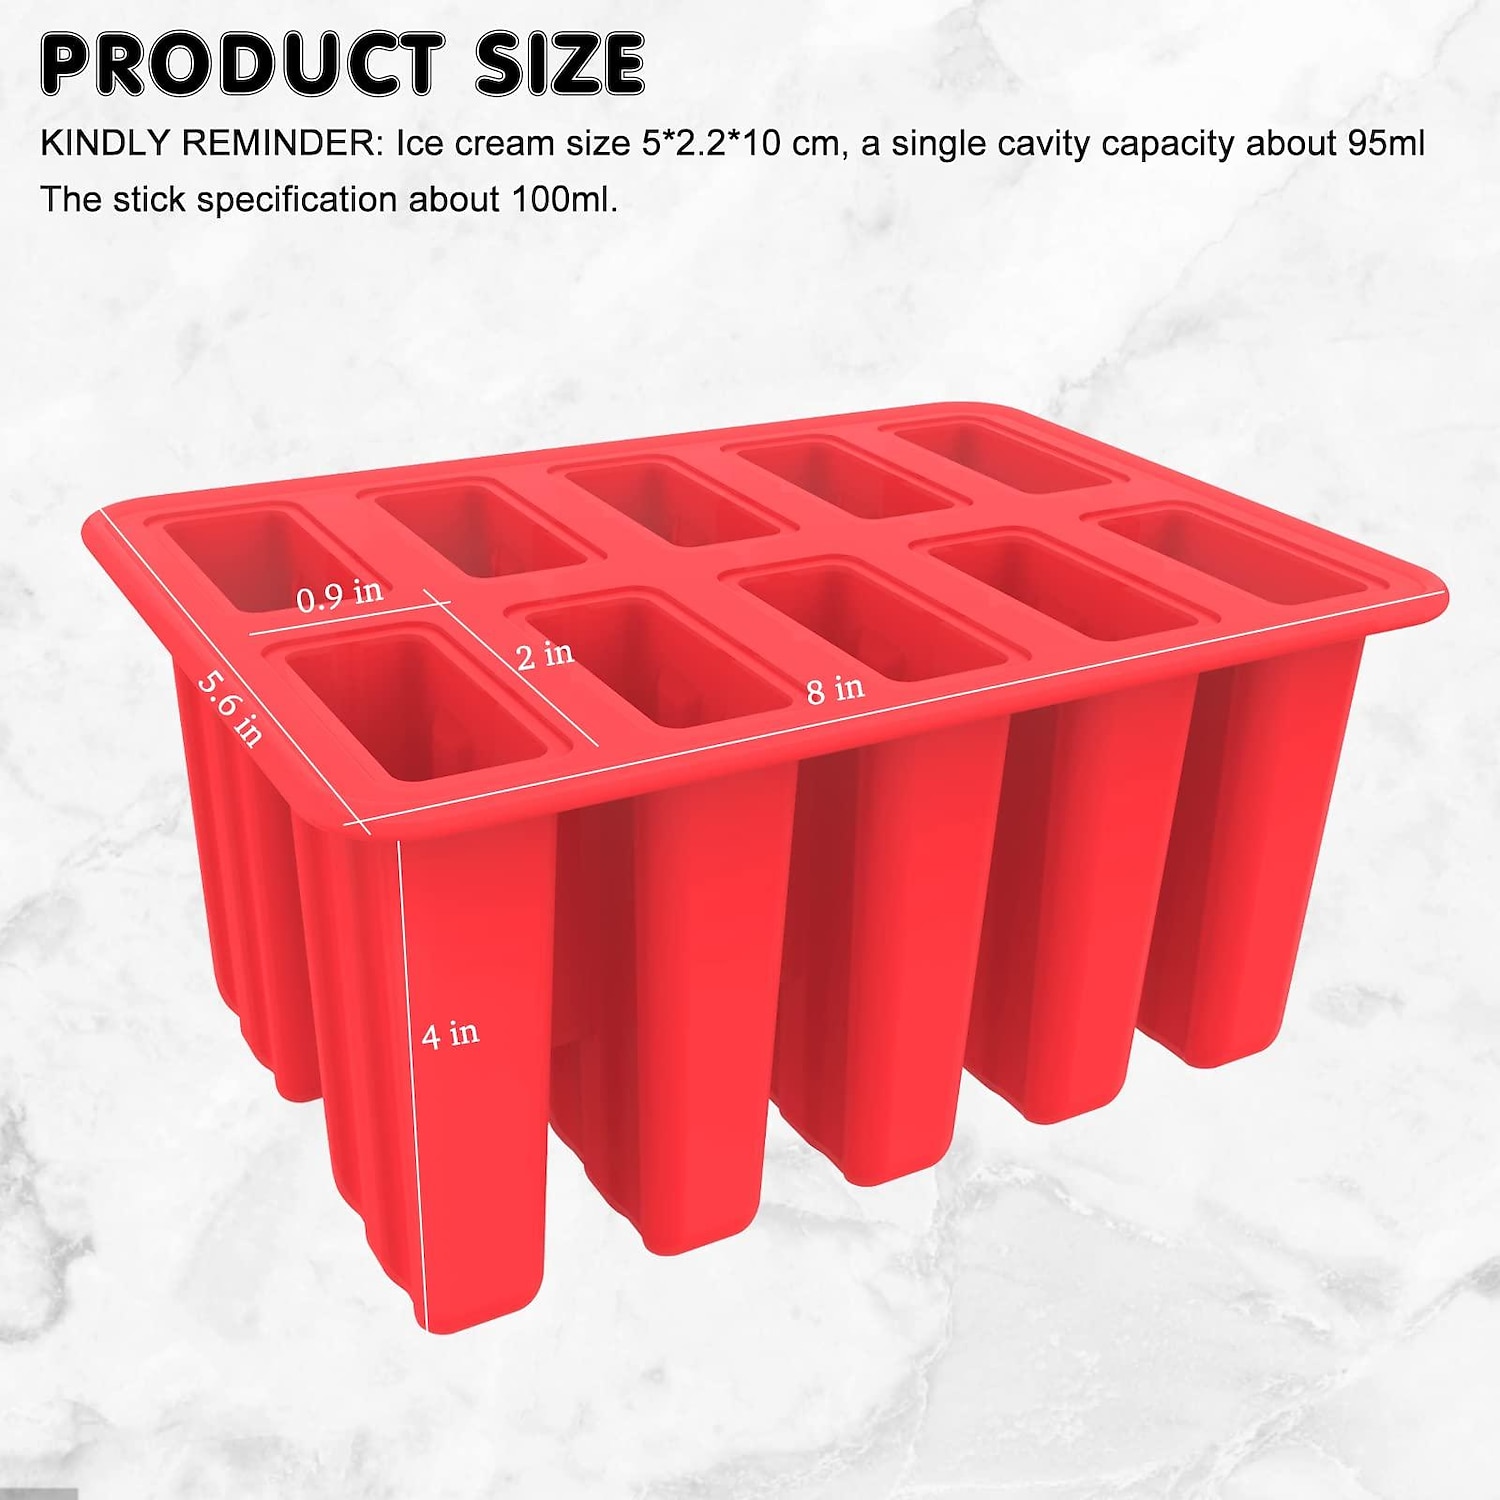 Homemade Popsicle Molds Shapes, Silicone Frozen Ice Popsicle Maker-BPA  Free, with 12 Reusable Popsicle Sticks 2023 - US $21.99